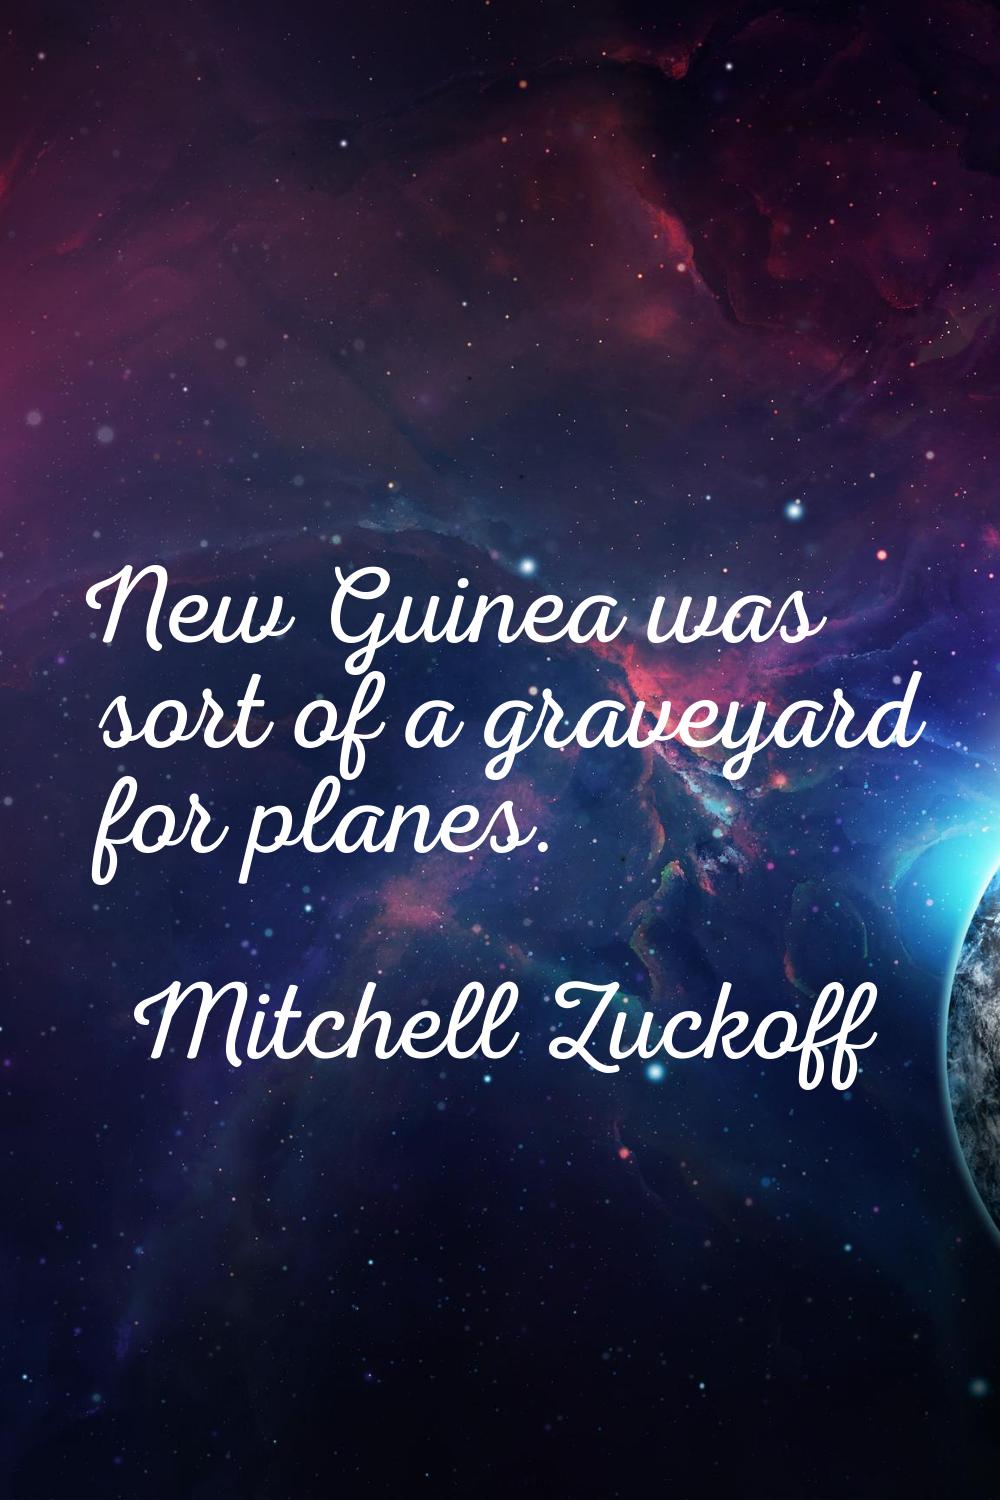 New Guinea was sort of a graveyard for planes.